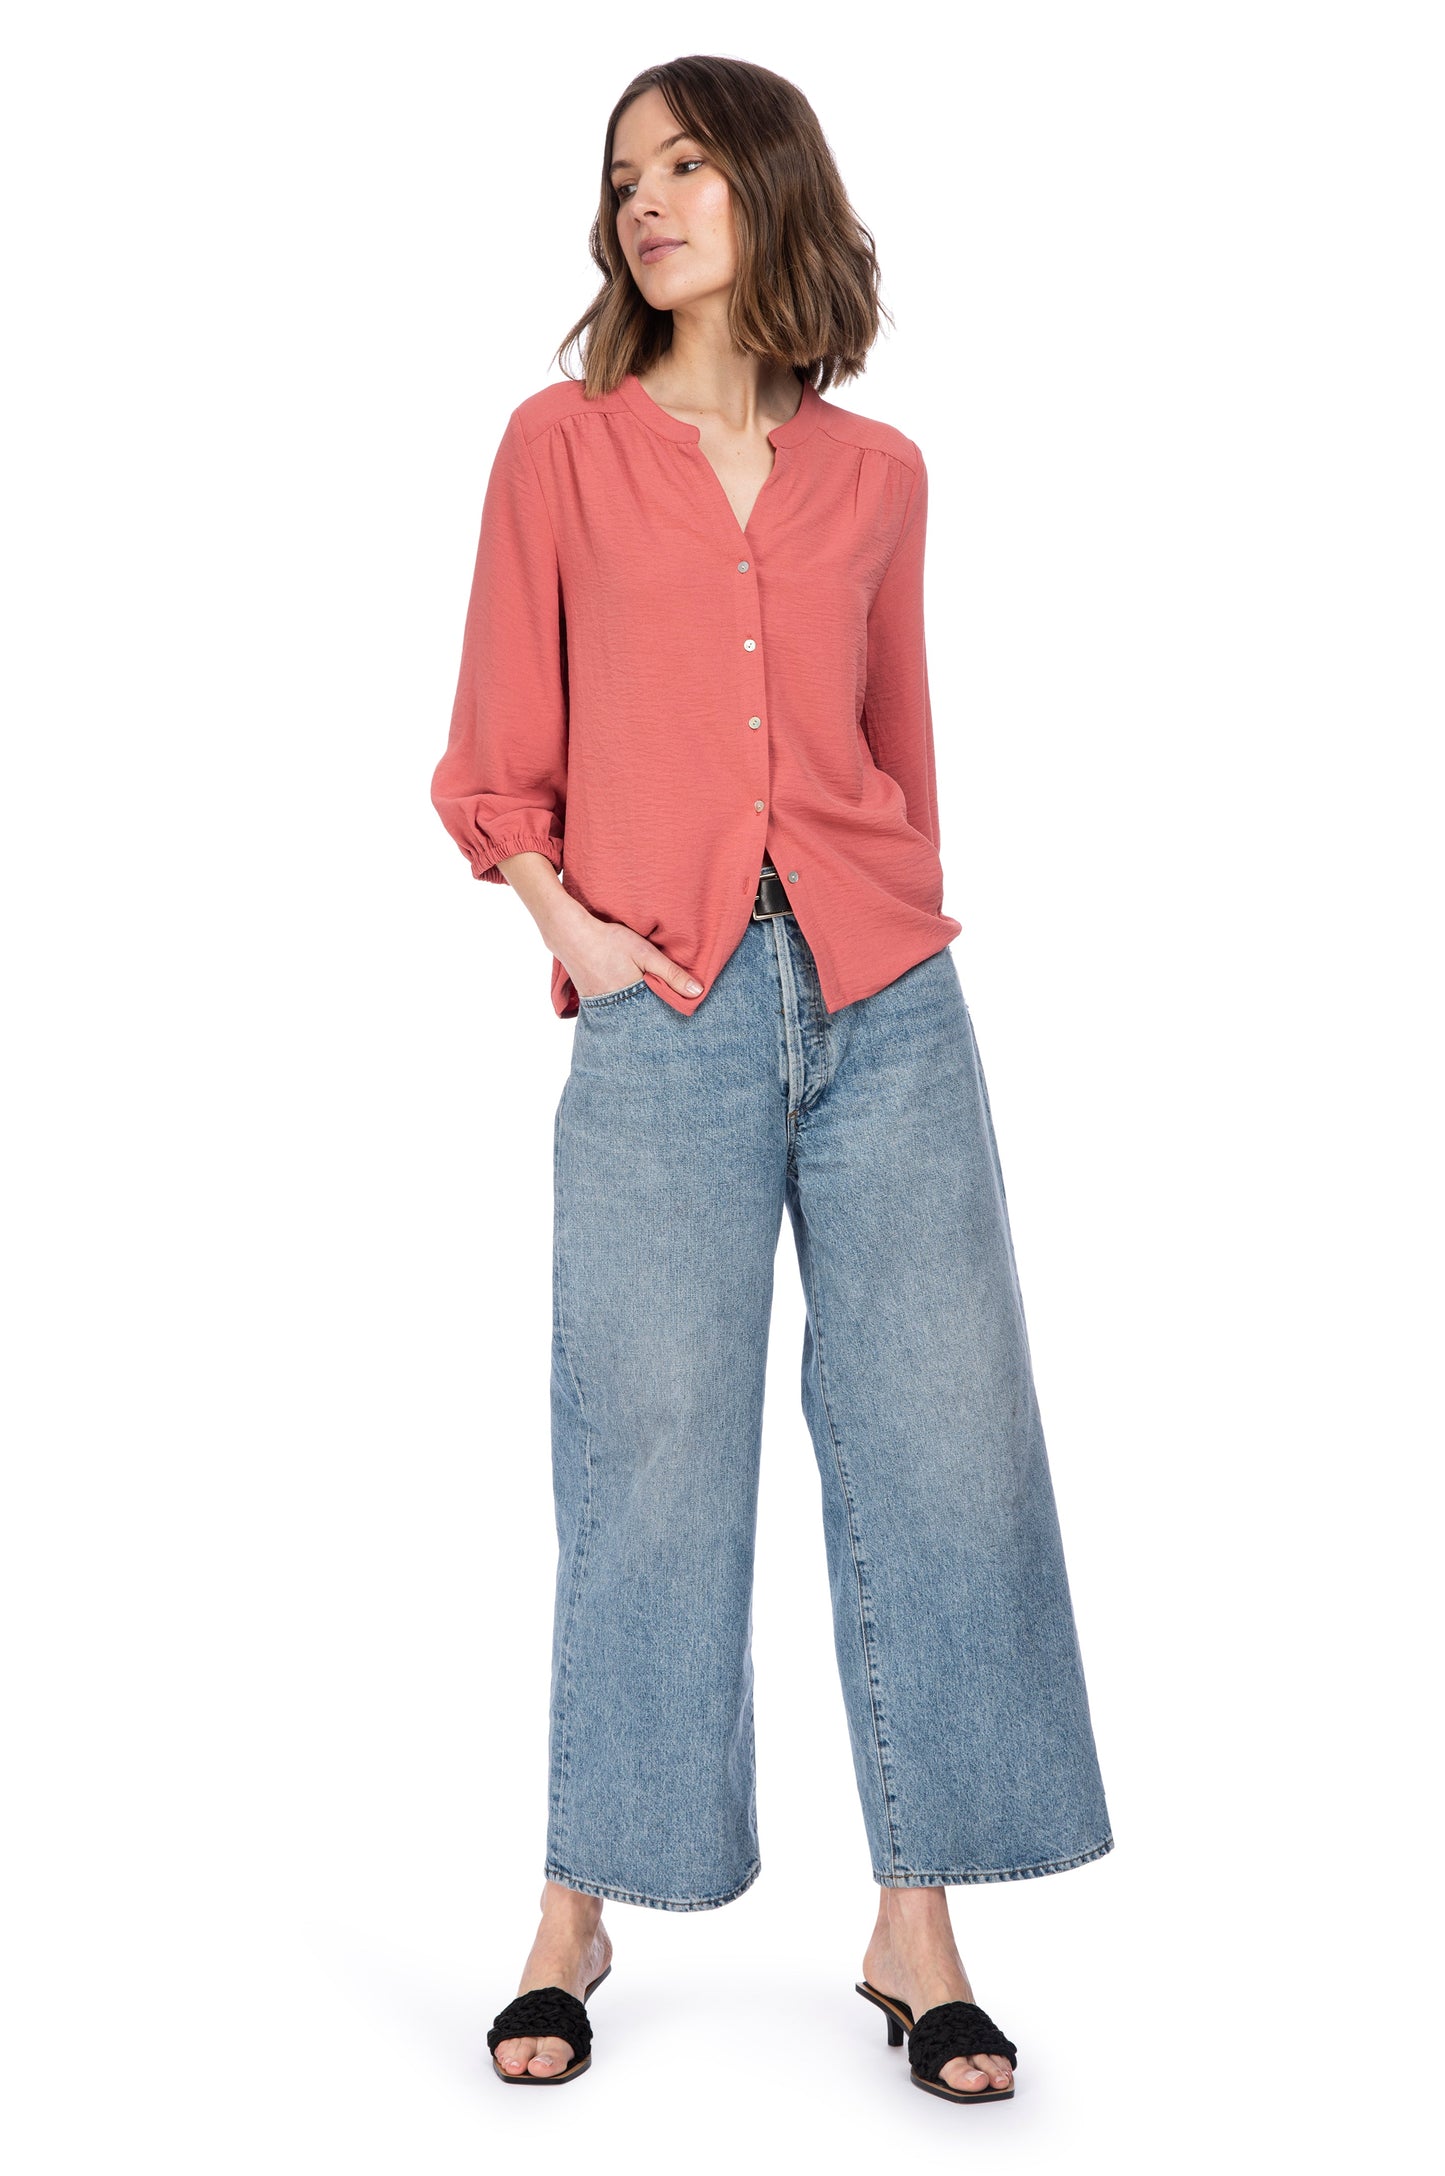 A woman stands confidently wearing a casual outfit that consists of a loose-fitting coral River Button Up Blouse made from 100% Polyester, wide-leg denim jeans, and black open-toe sandals. Brand Name: B Collection by Bobeau